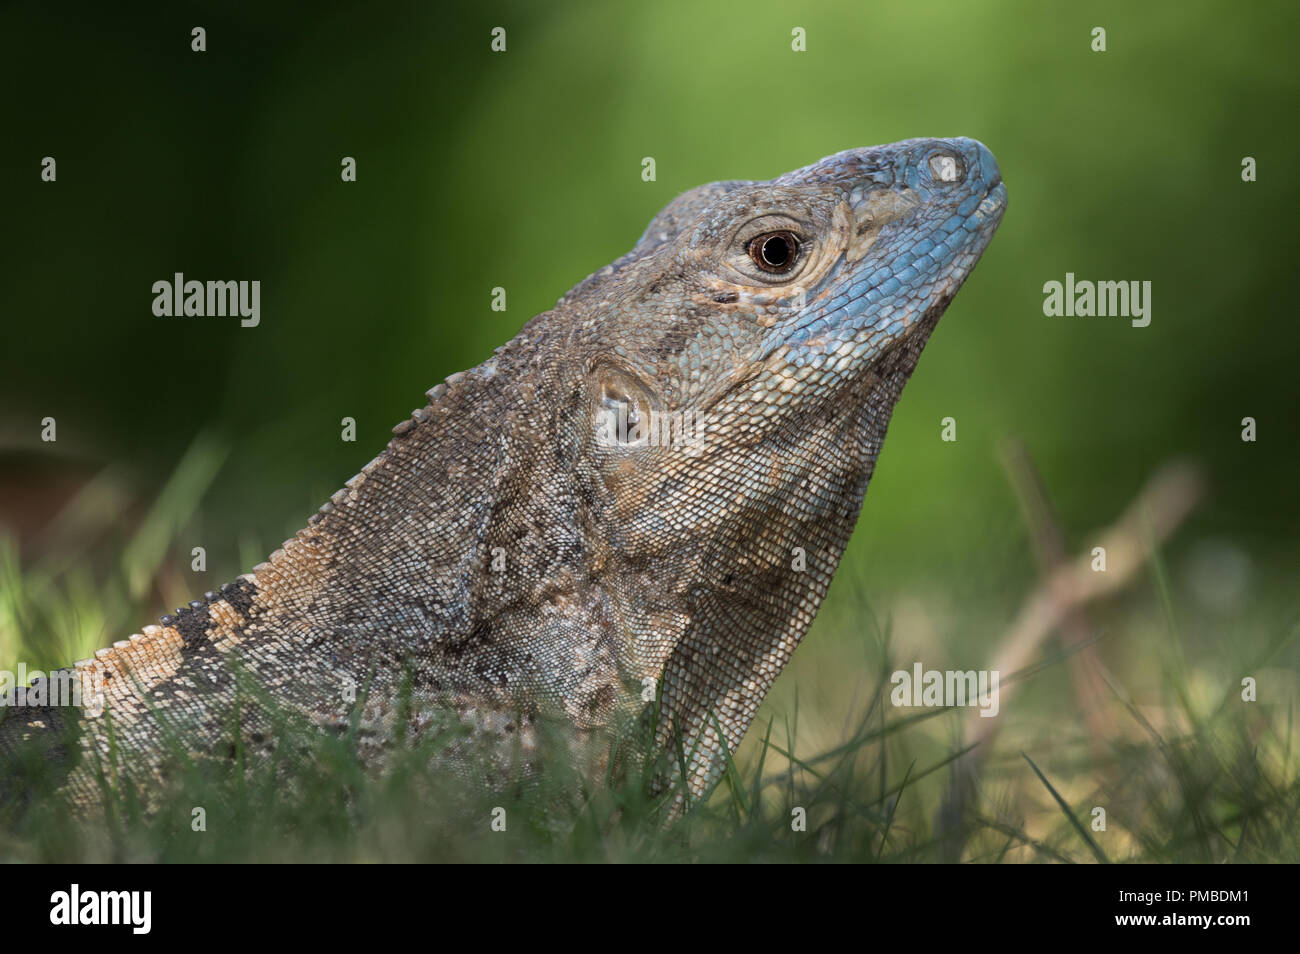 Portrait of a spinytail iguana photographed in Costa Rica Stock Photo